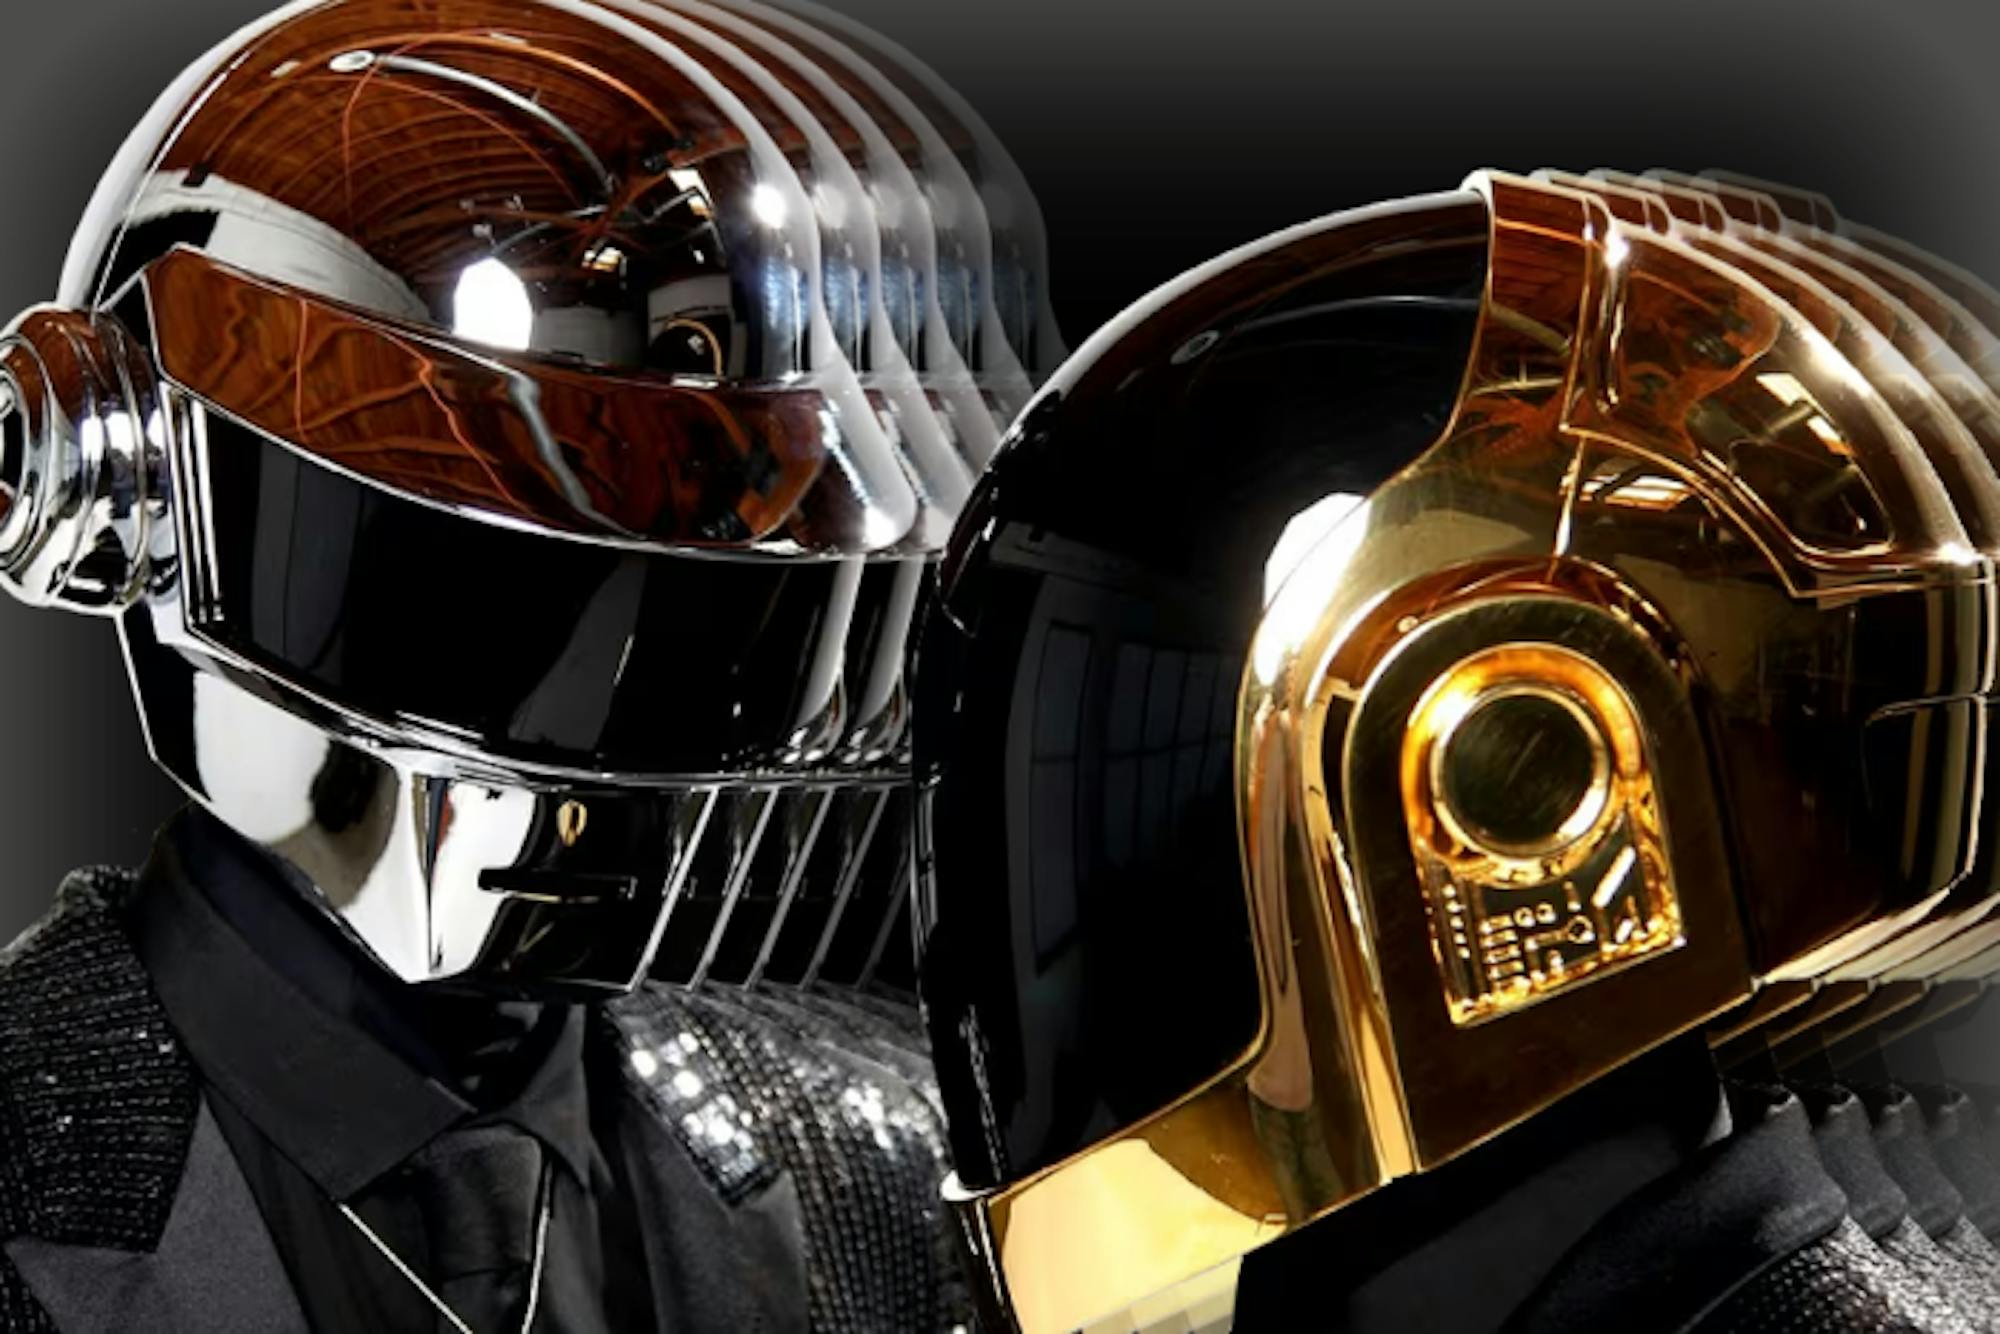 Daft Punk's 'Random Access Memories (Drumless Edition)': Giving life back  to music - The Observer